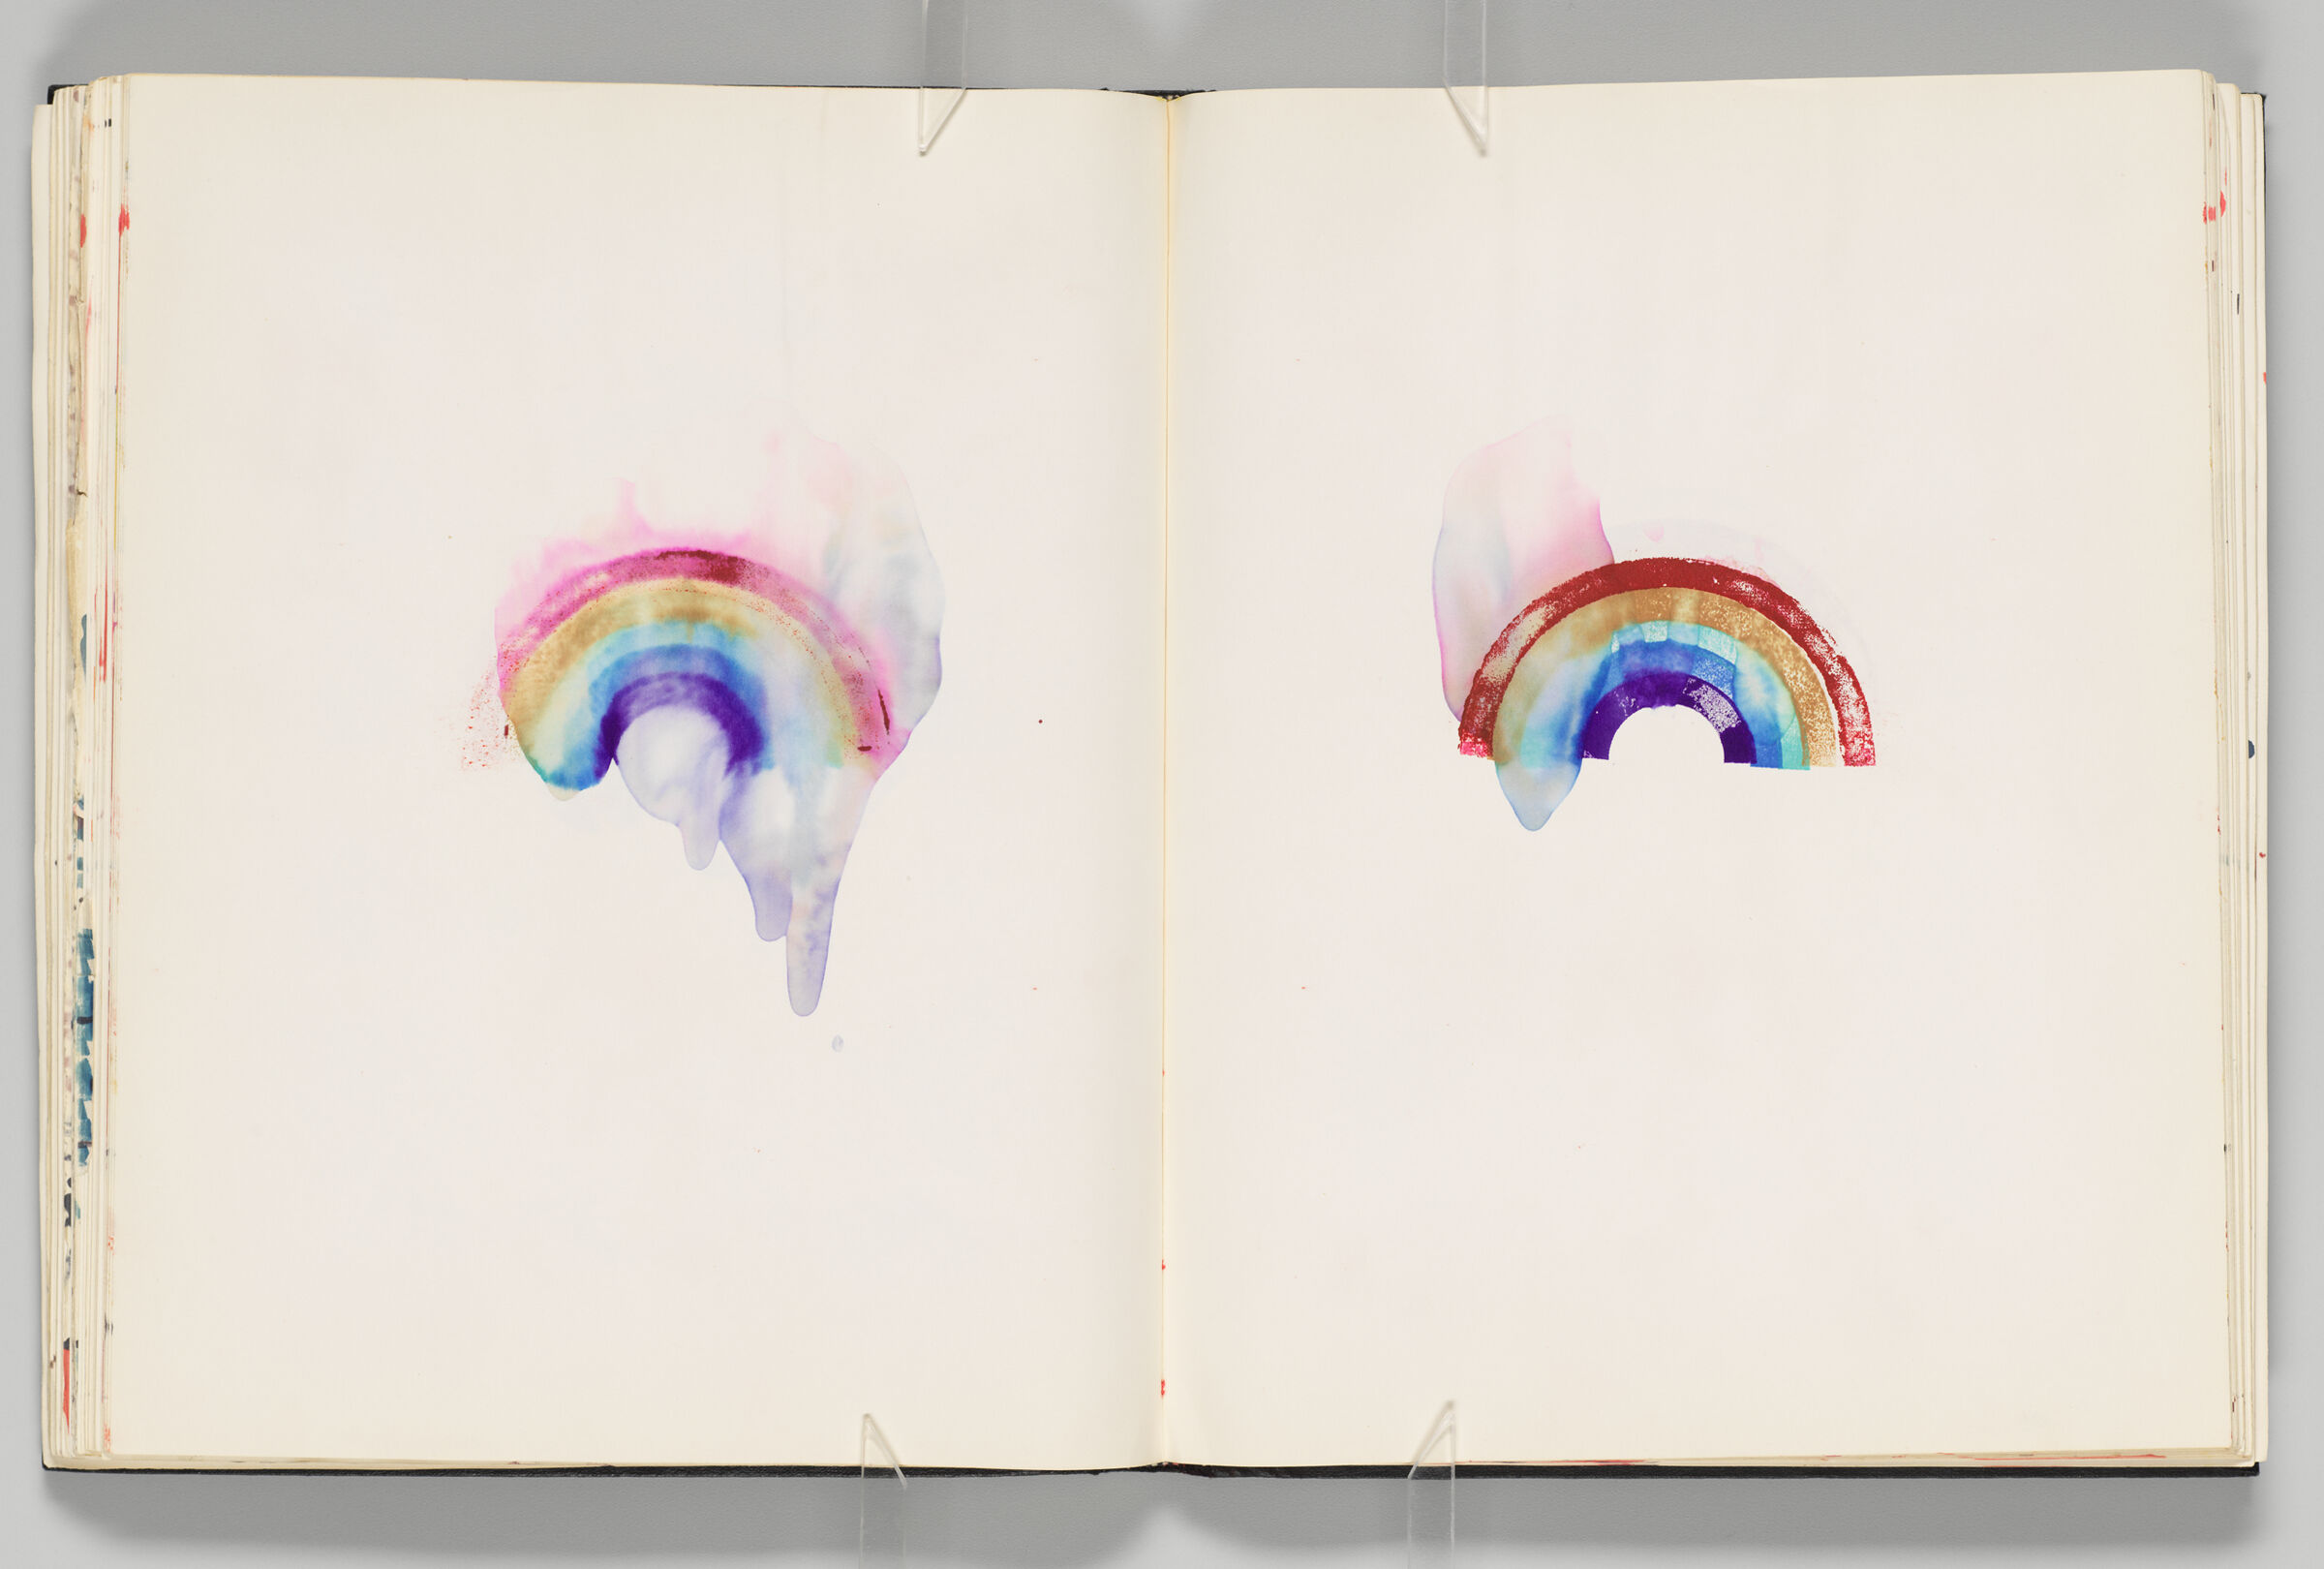 Untitled (Bleed-Through Of Previous Page And Color Transfer, Left Page); Untitled (Rainbow Stamp Impression Manipulated With Water, Right Page)